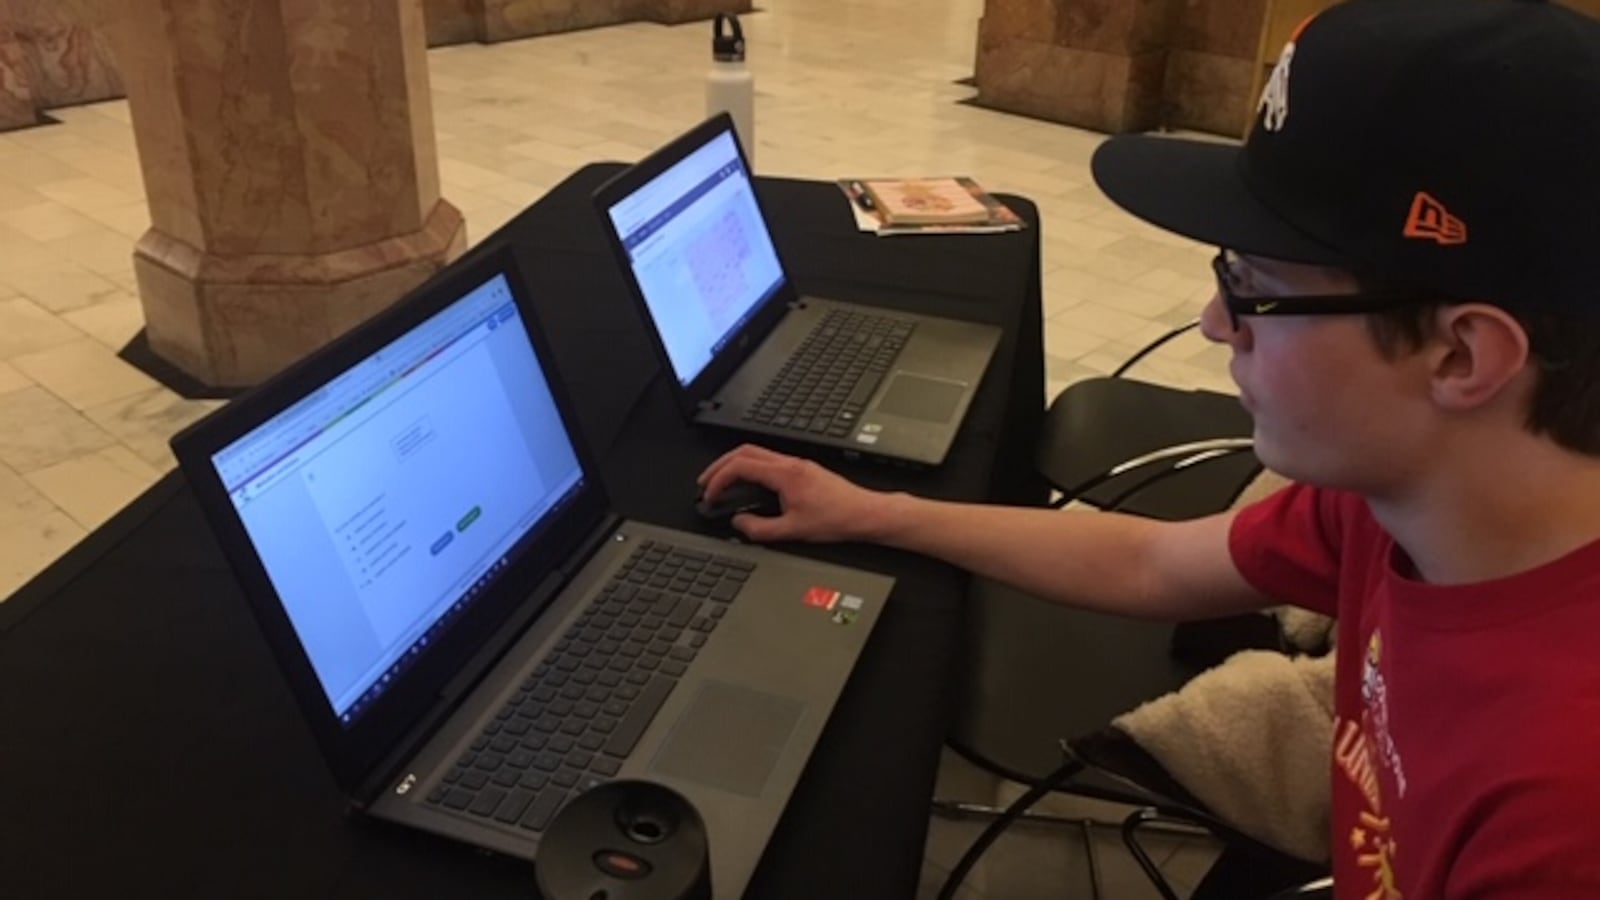 Tyler Landsparger, 17, took his online learning to the Colorado State Capitol recently as part of Cyberschool Day.